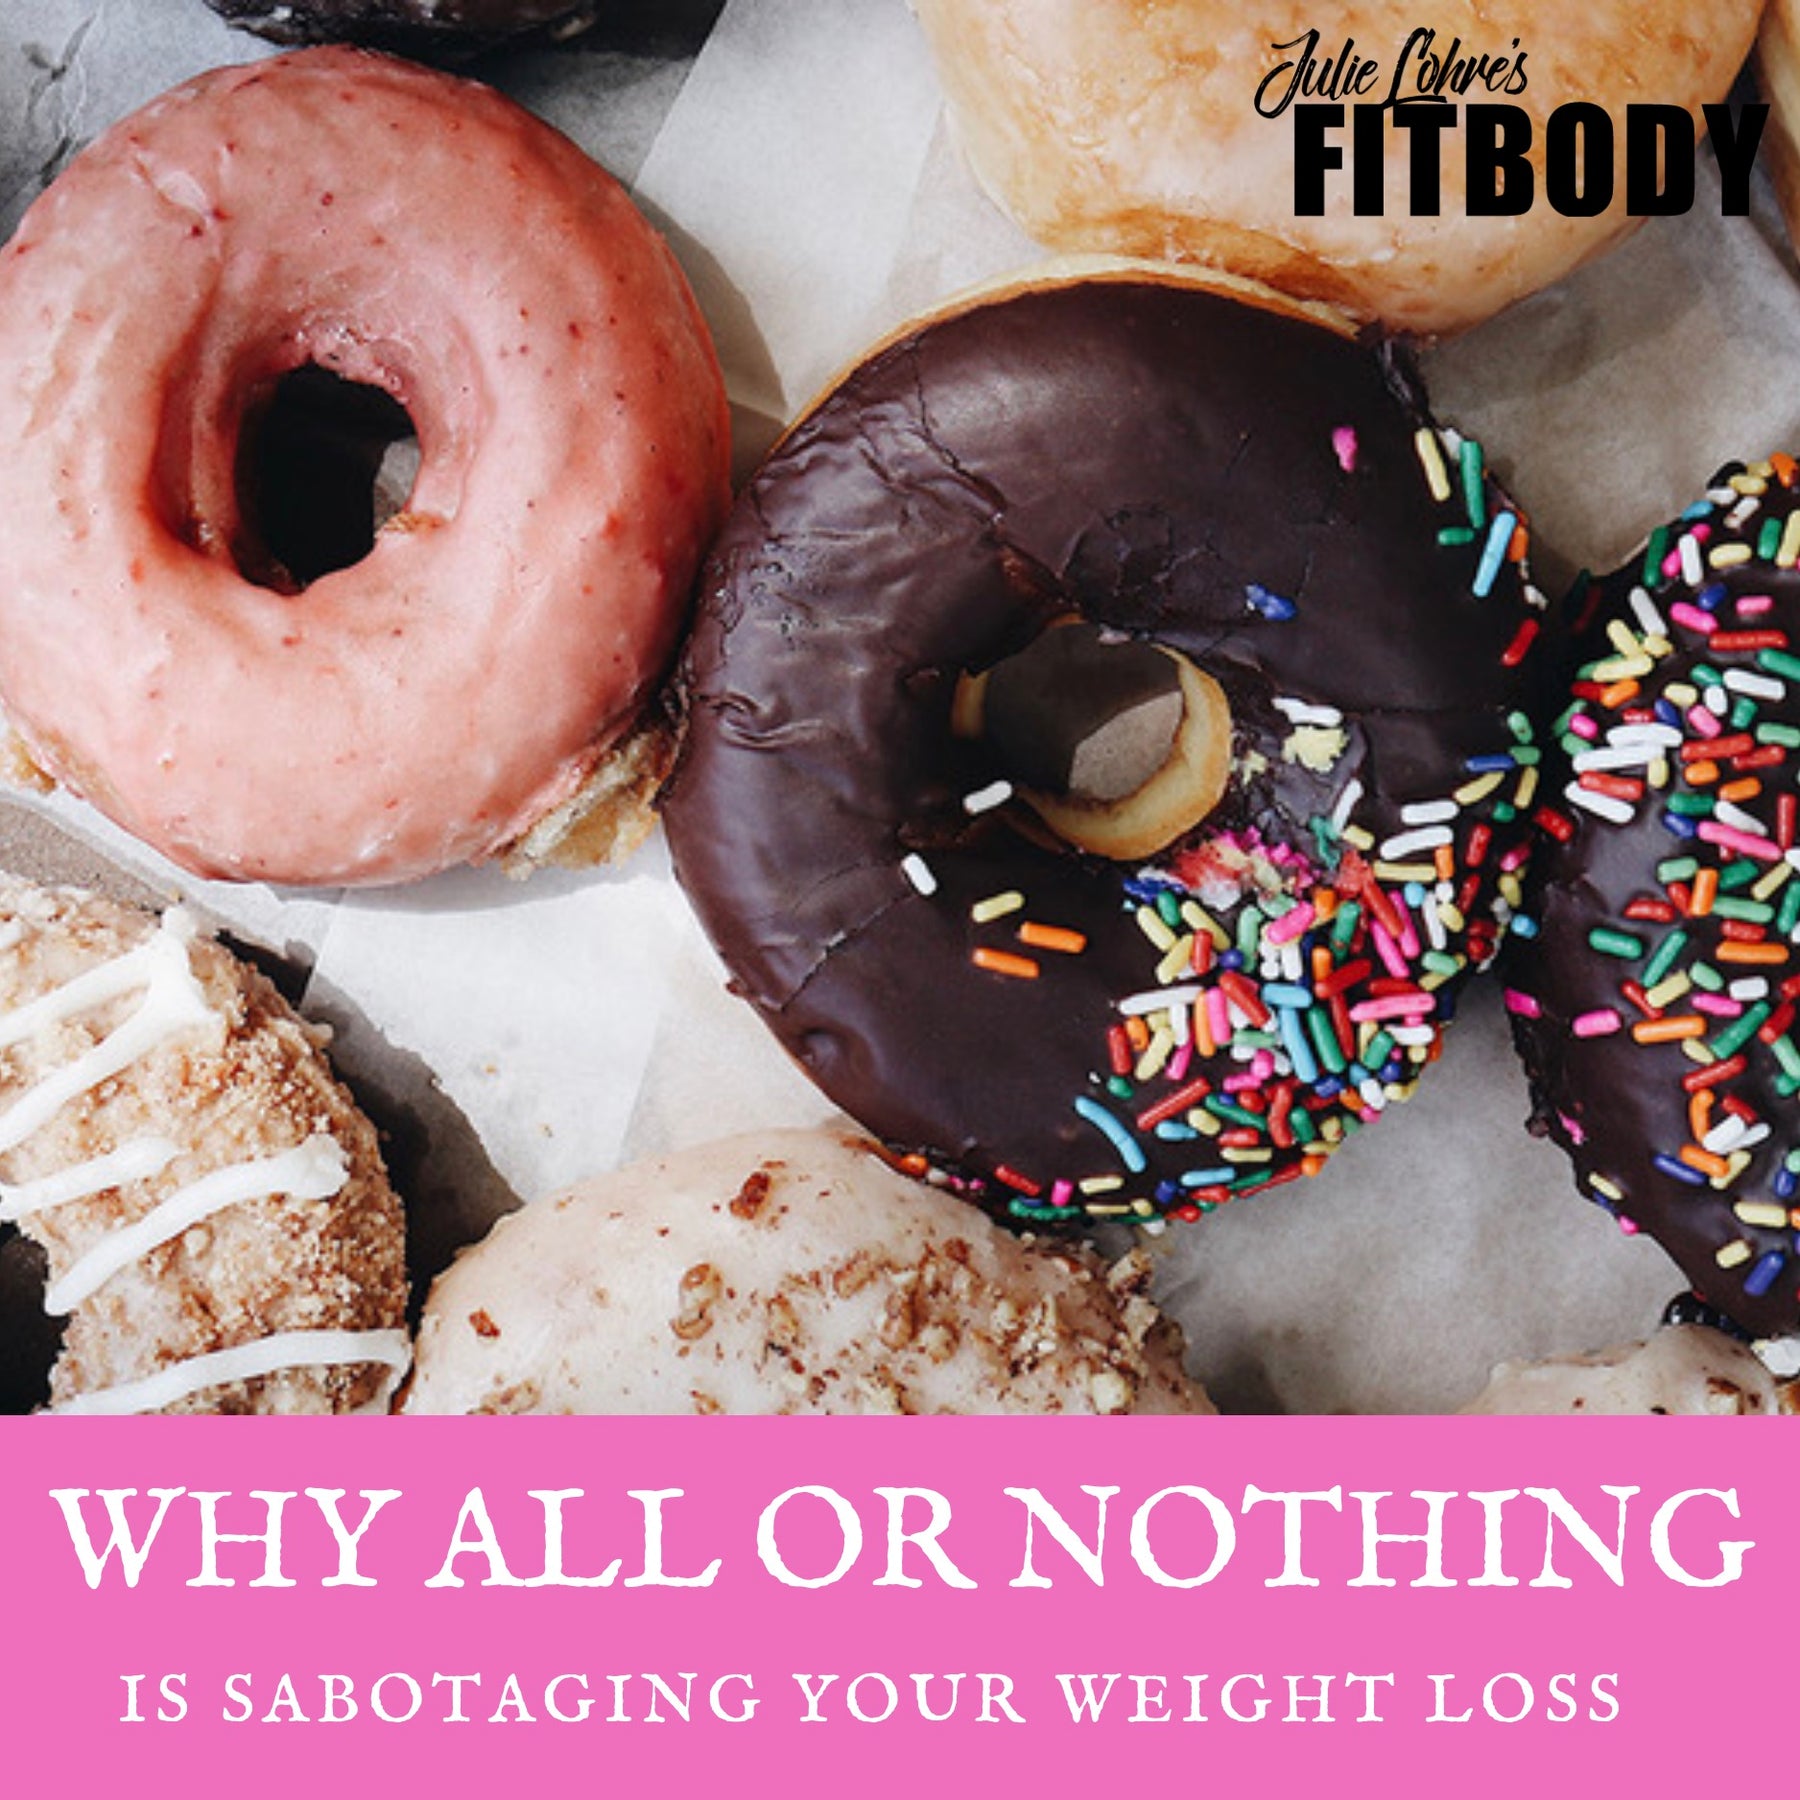 Is All Or Nothing Thinking Sabotaging Your Weight Loss?